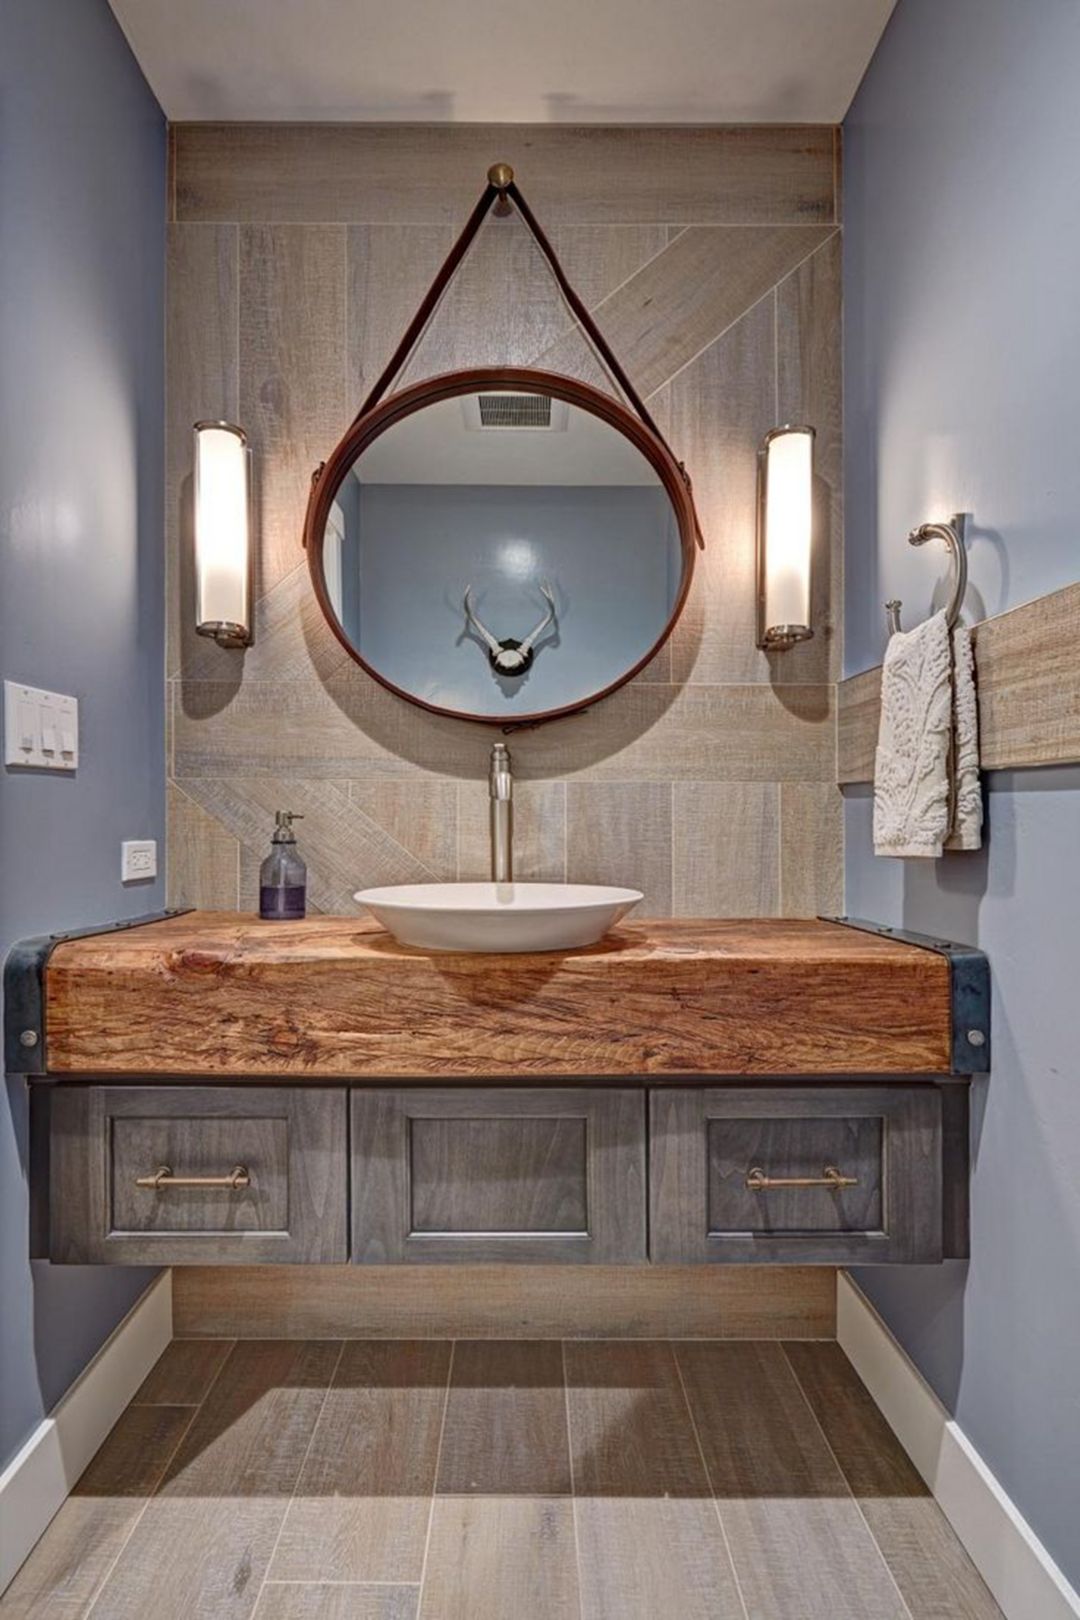 This Bathroom Features Both Earthy